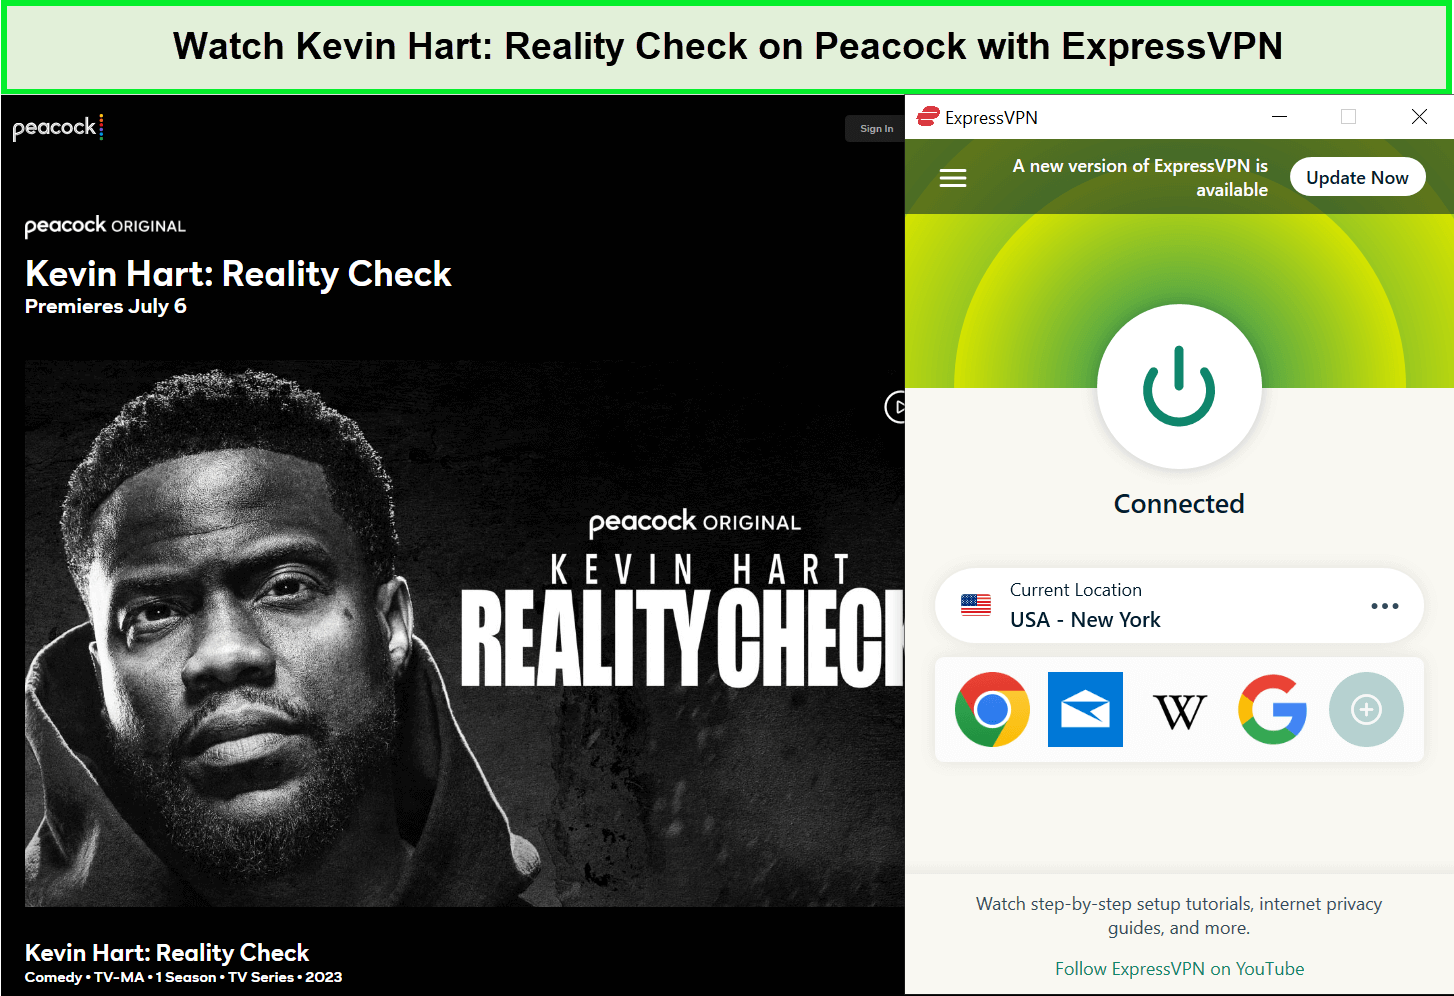 Watch-Kevin-Hart-Reality-Check-in-Australia-on-Peacock-with-ExpressVPN